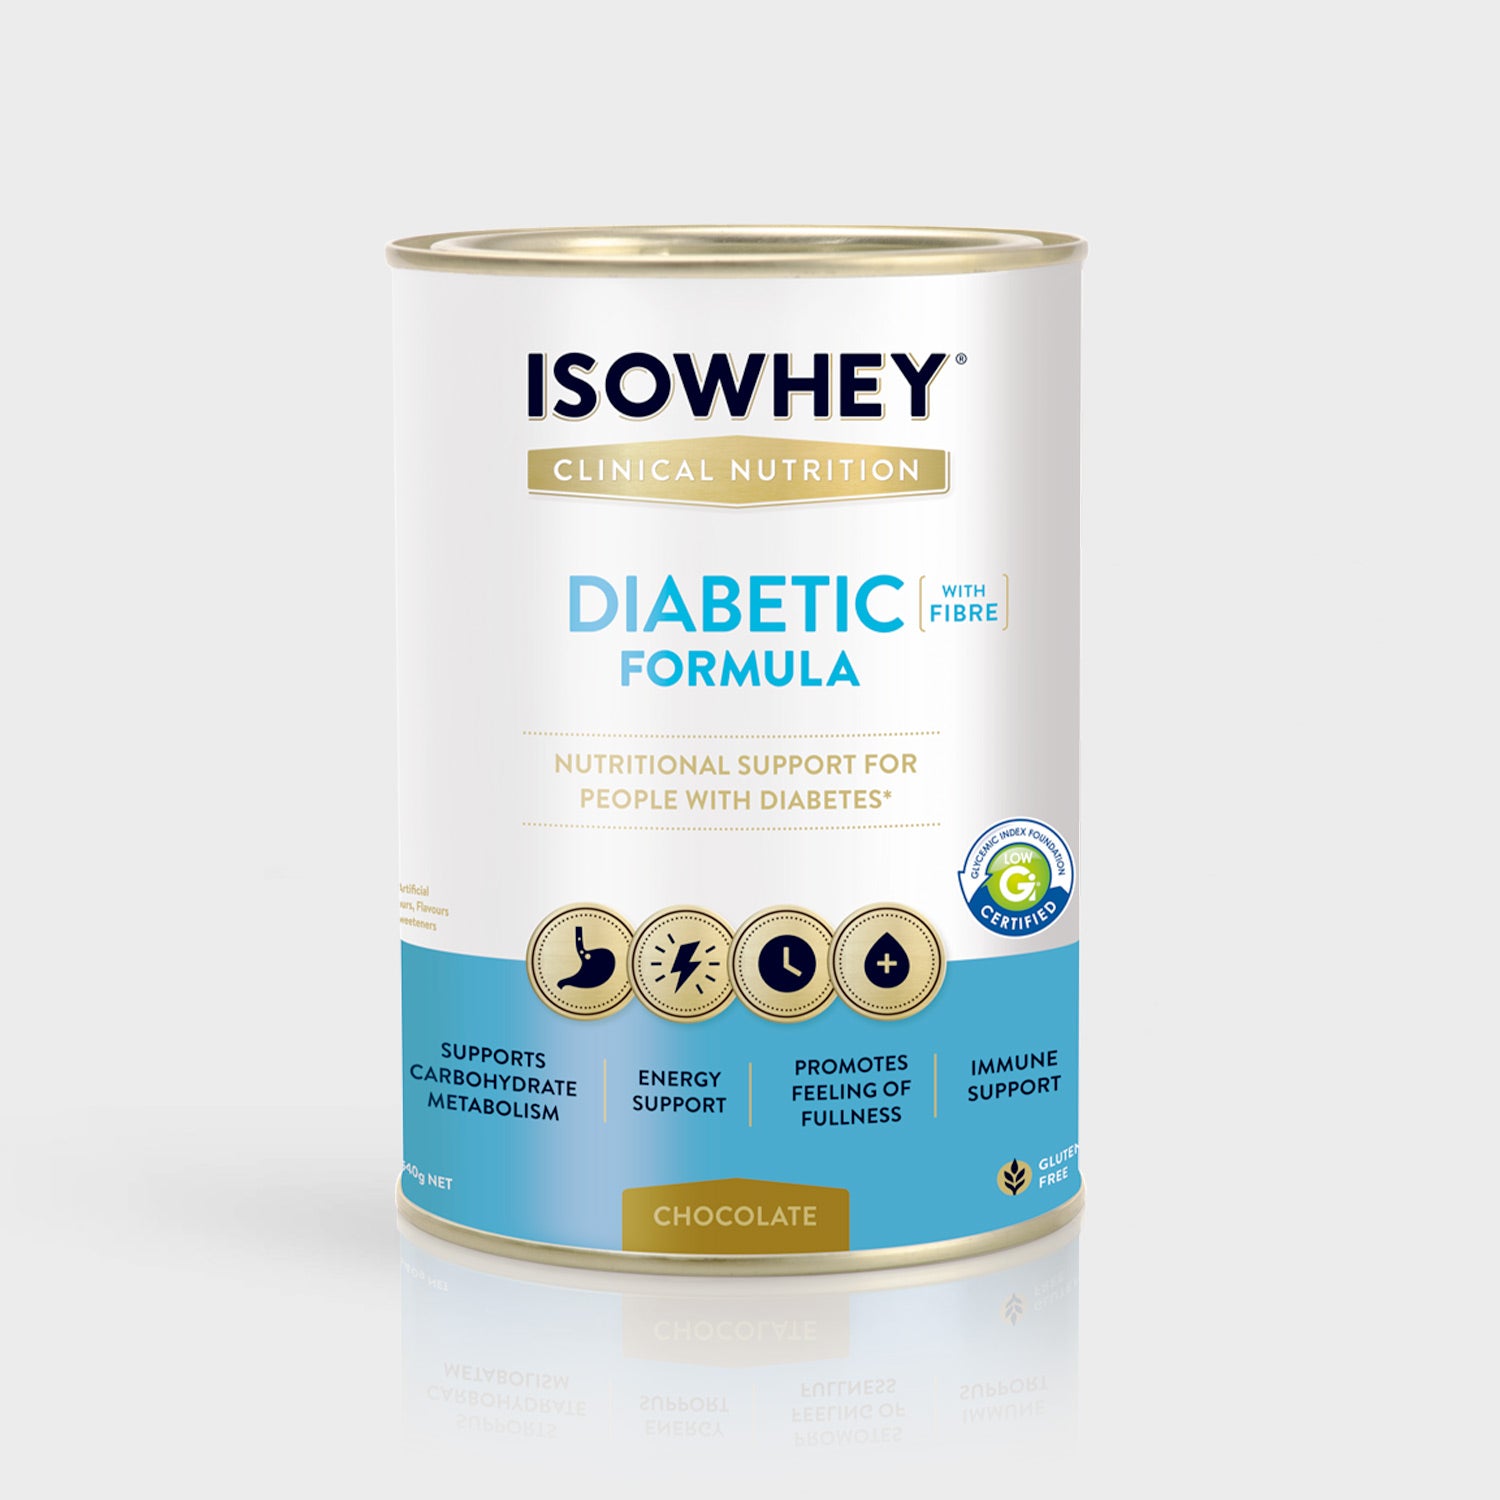 IsoWhey Clinical Nutrition Diabetic Formula Chocolate designed to support sugar metabolism